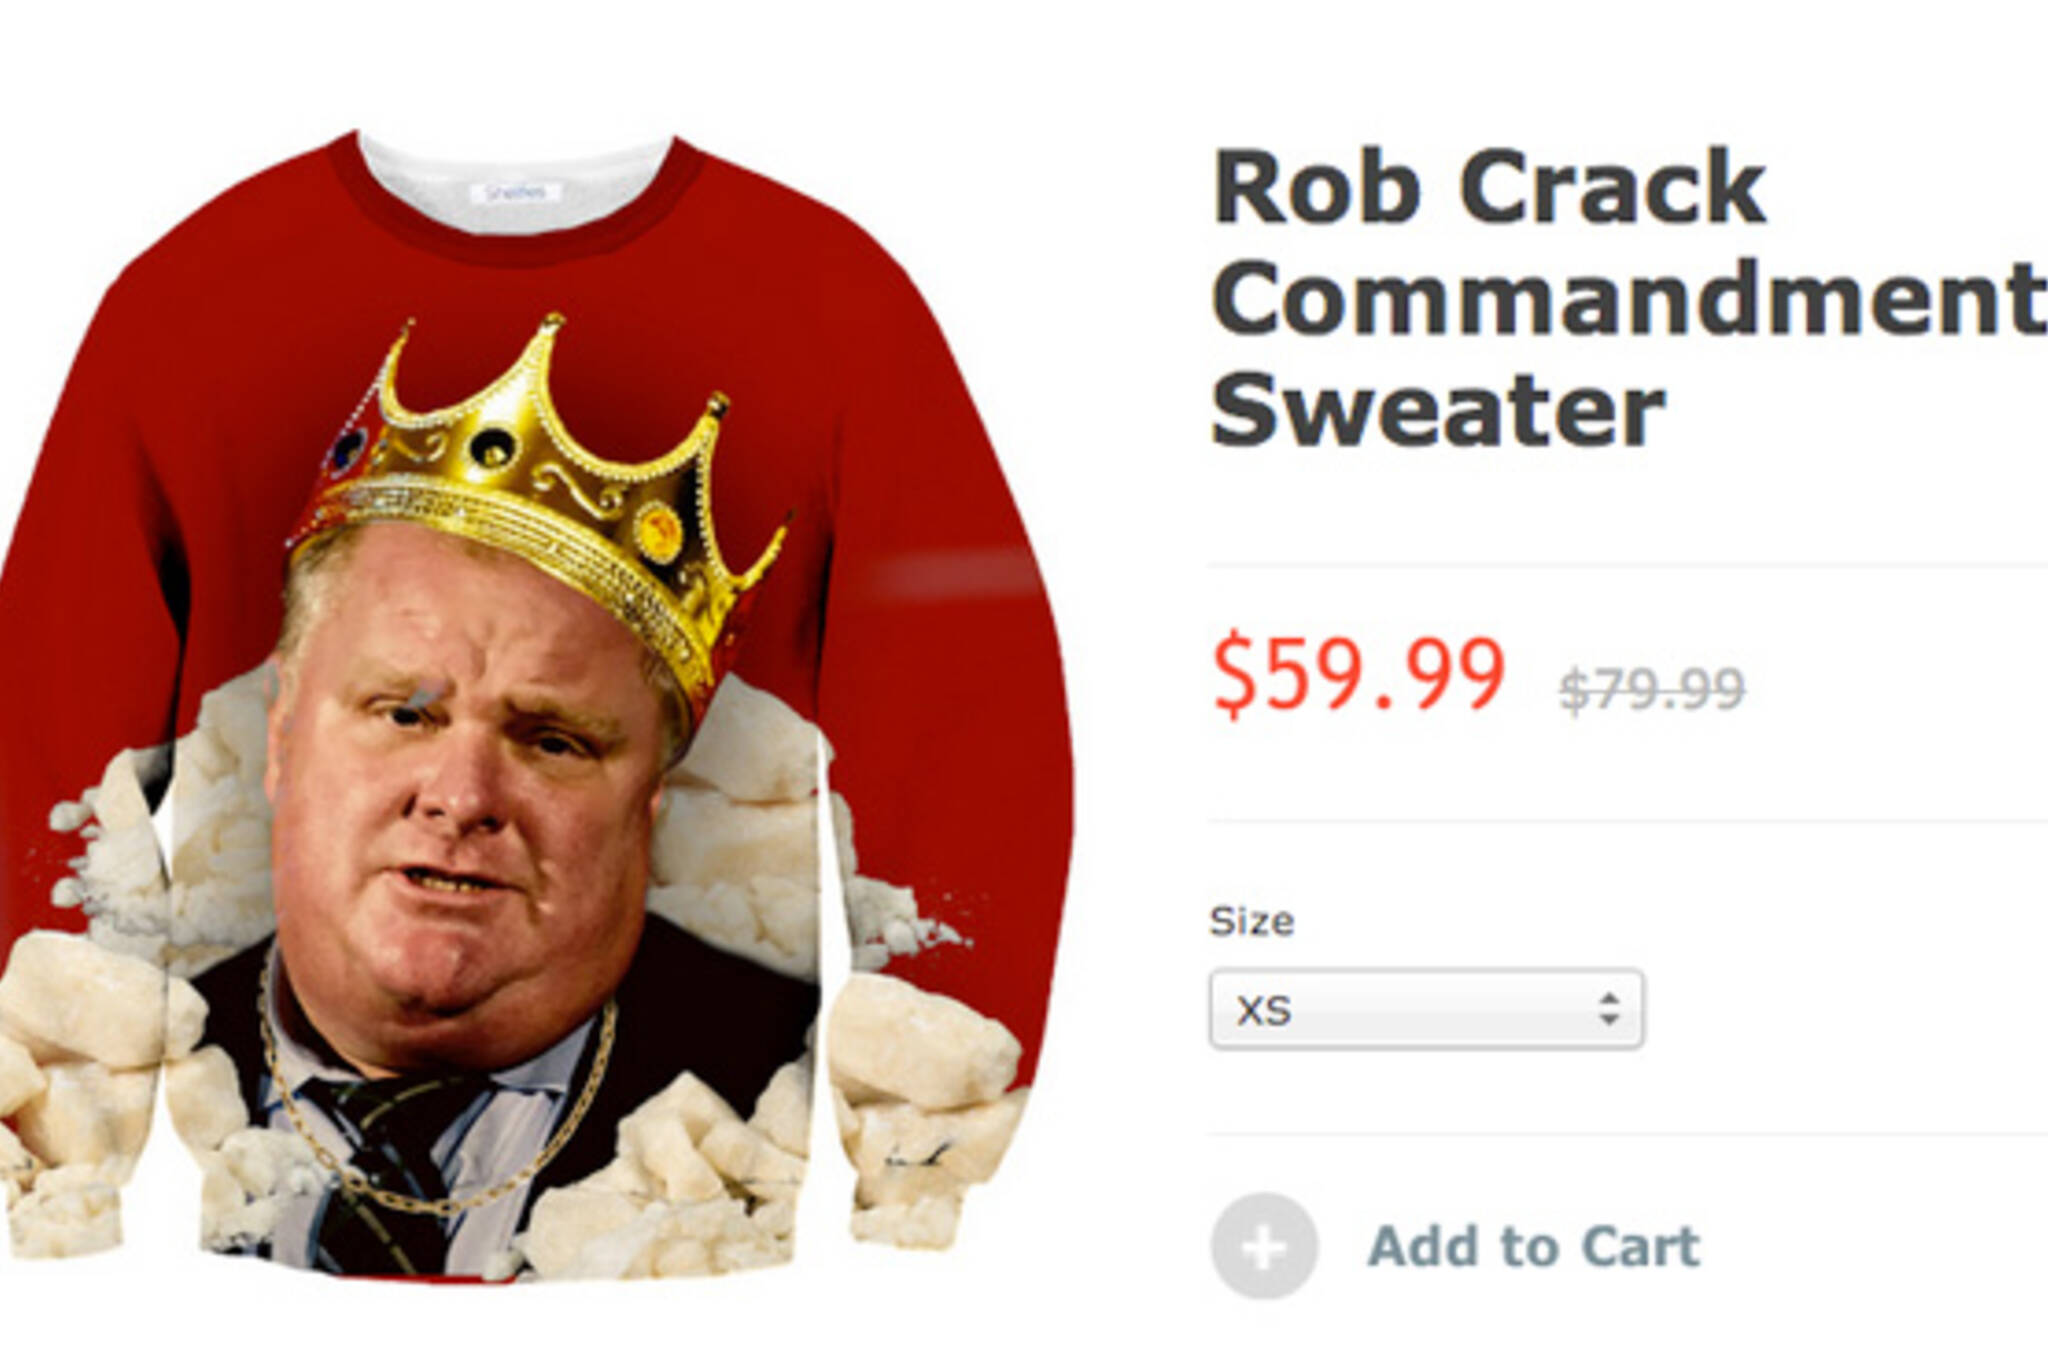 Rob Ford Swag